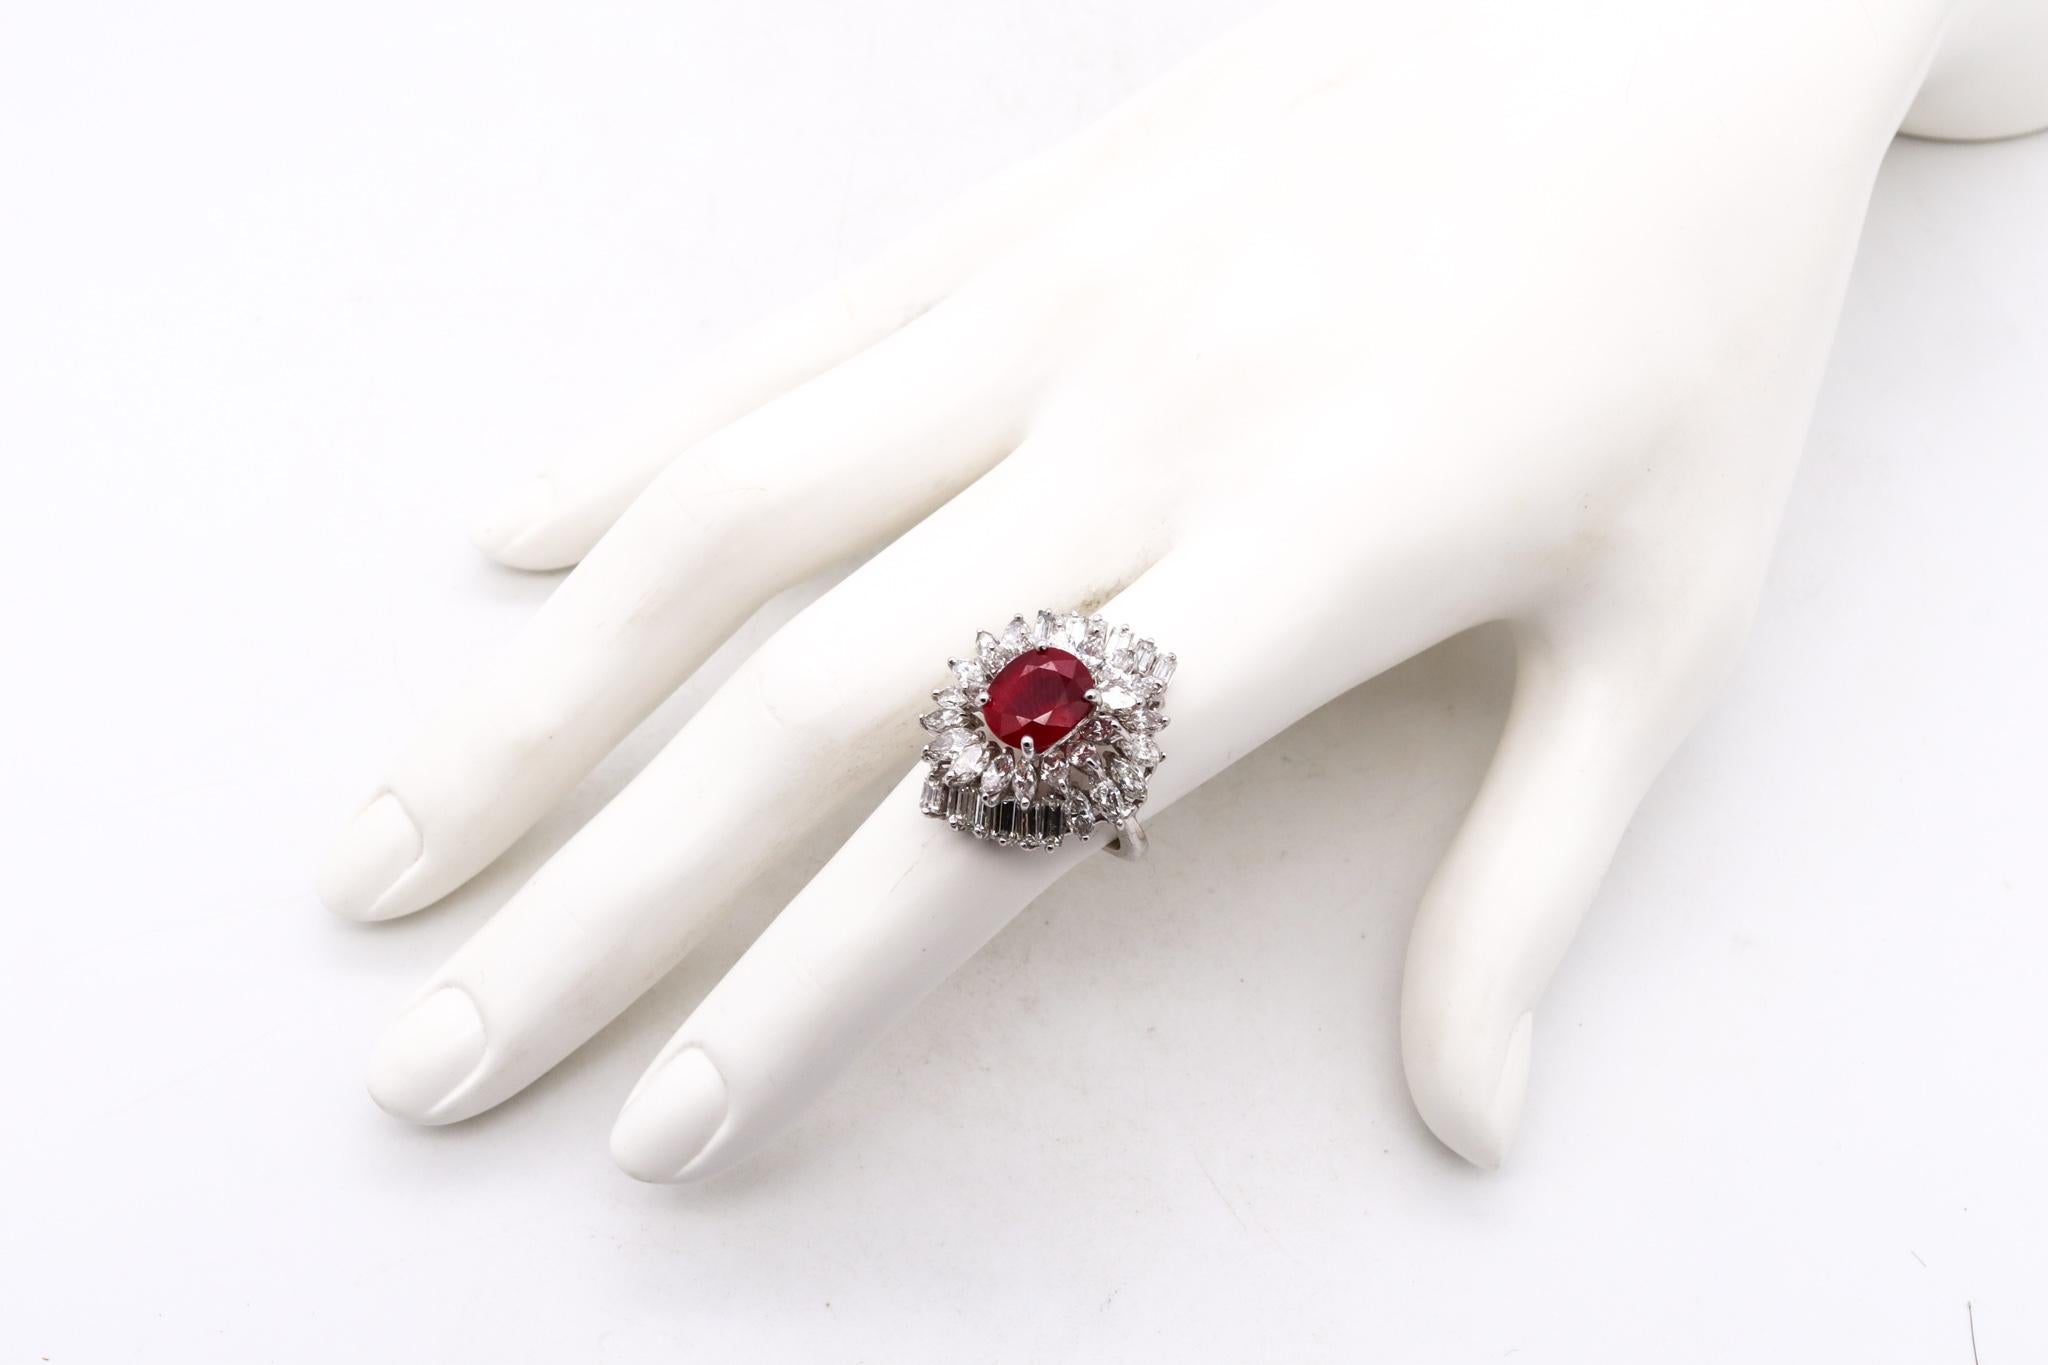 Modernist Mid Century 1960 Cluster Cocktail Ring 14Kt Gold 7.06 Cts In Diamonds Red Spinel